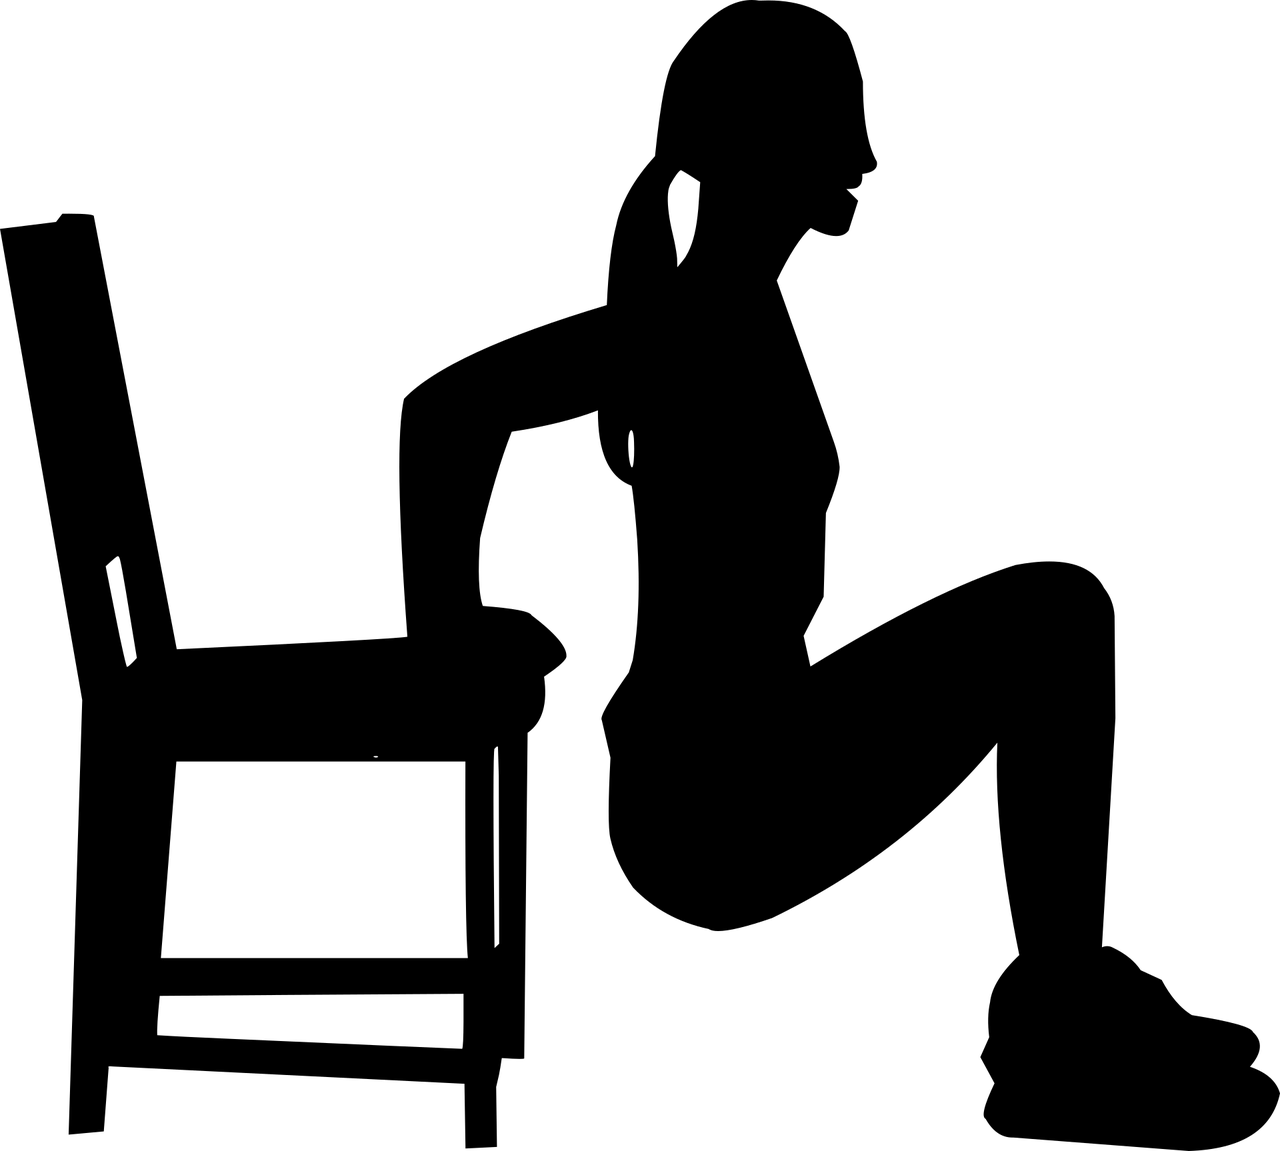 What Are Some Yoga Exercises That Can Be Done On A Chair At Home?